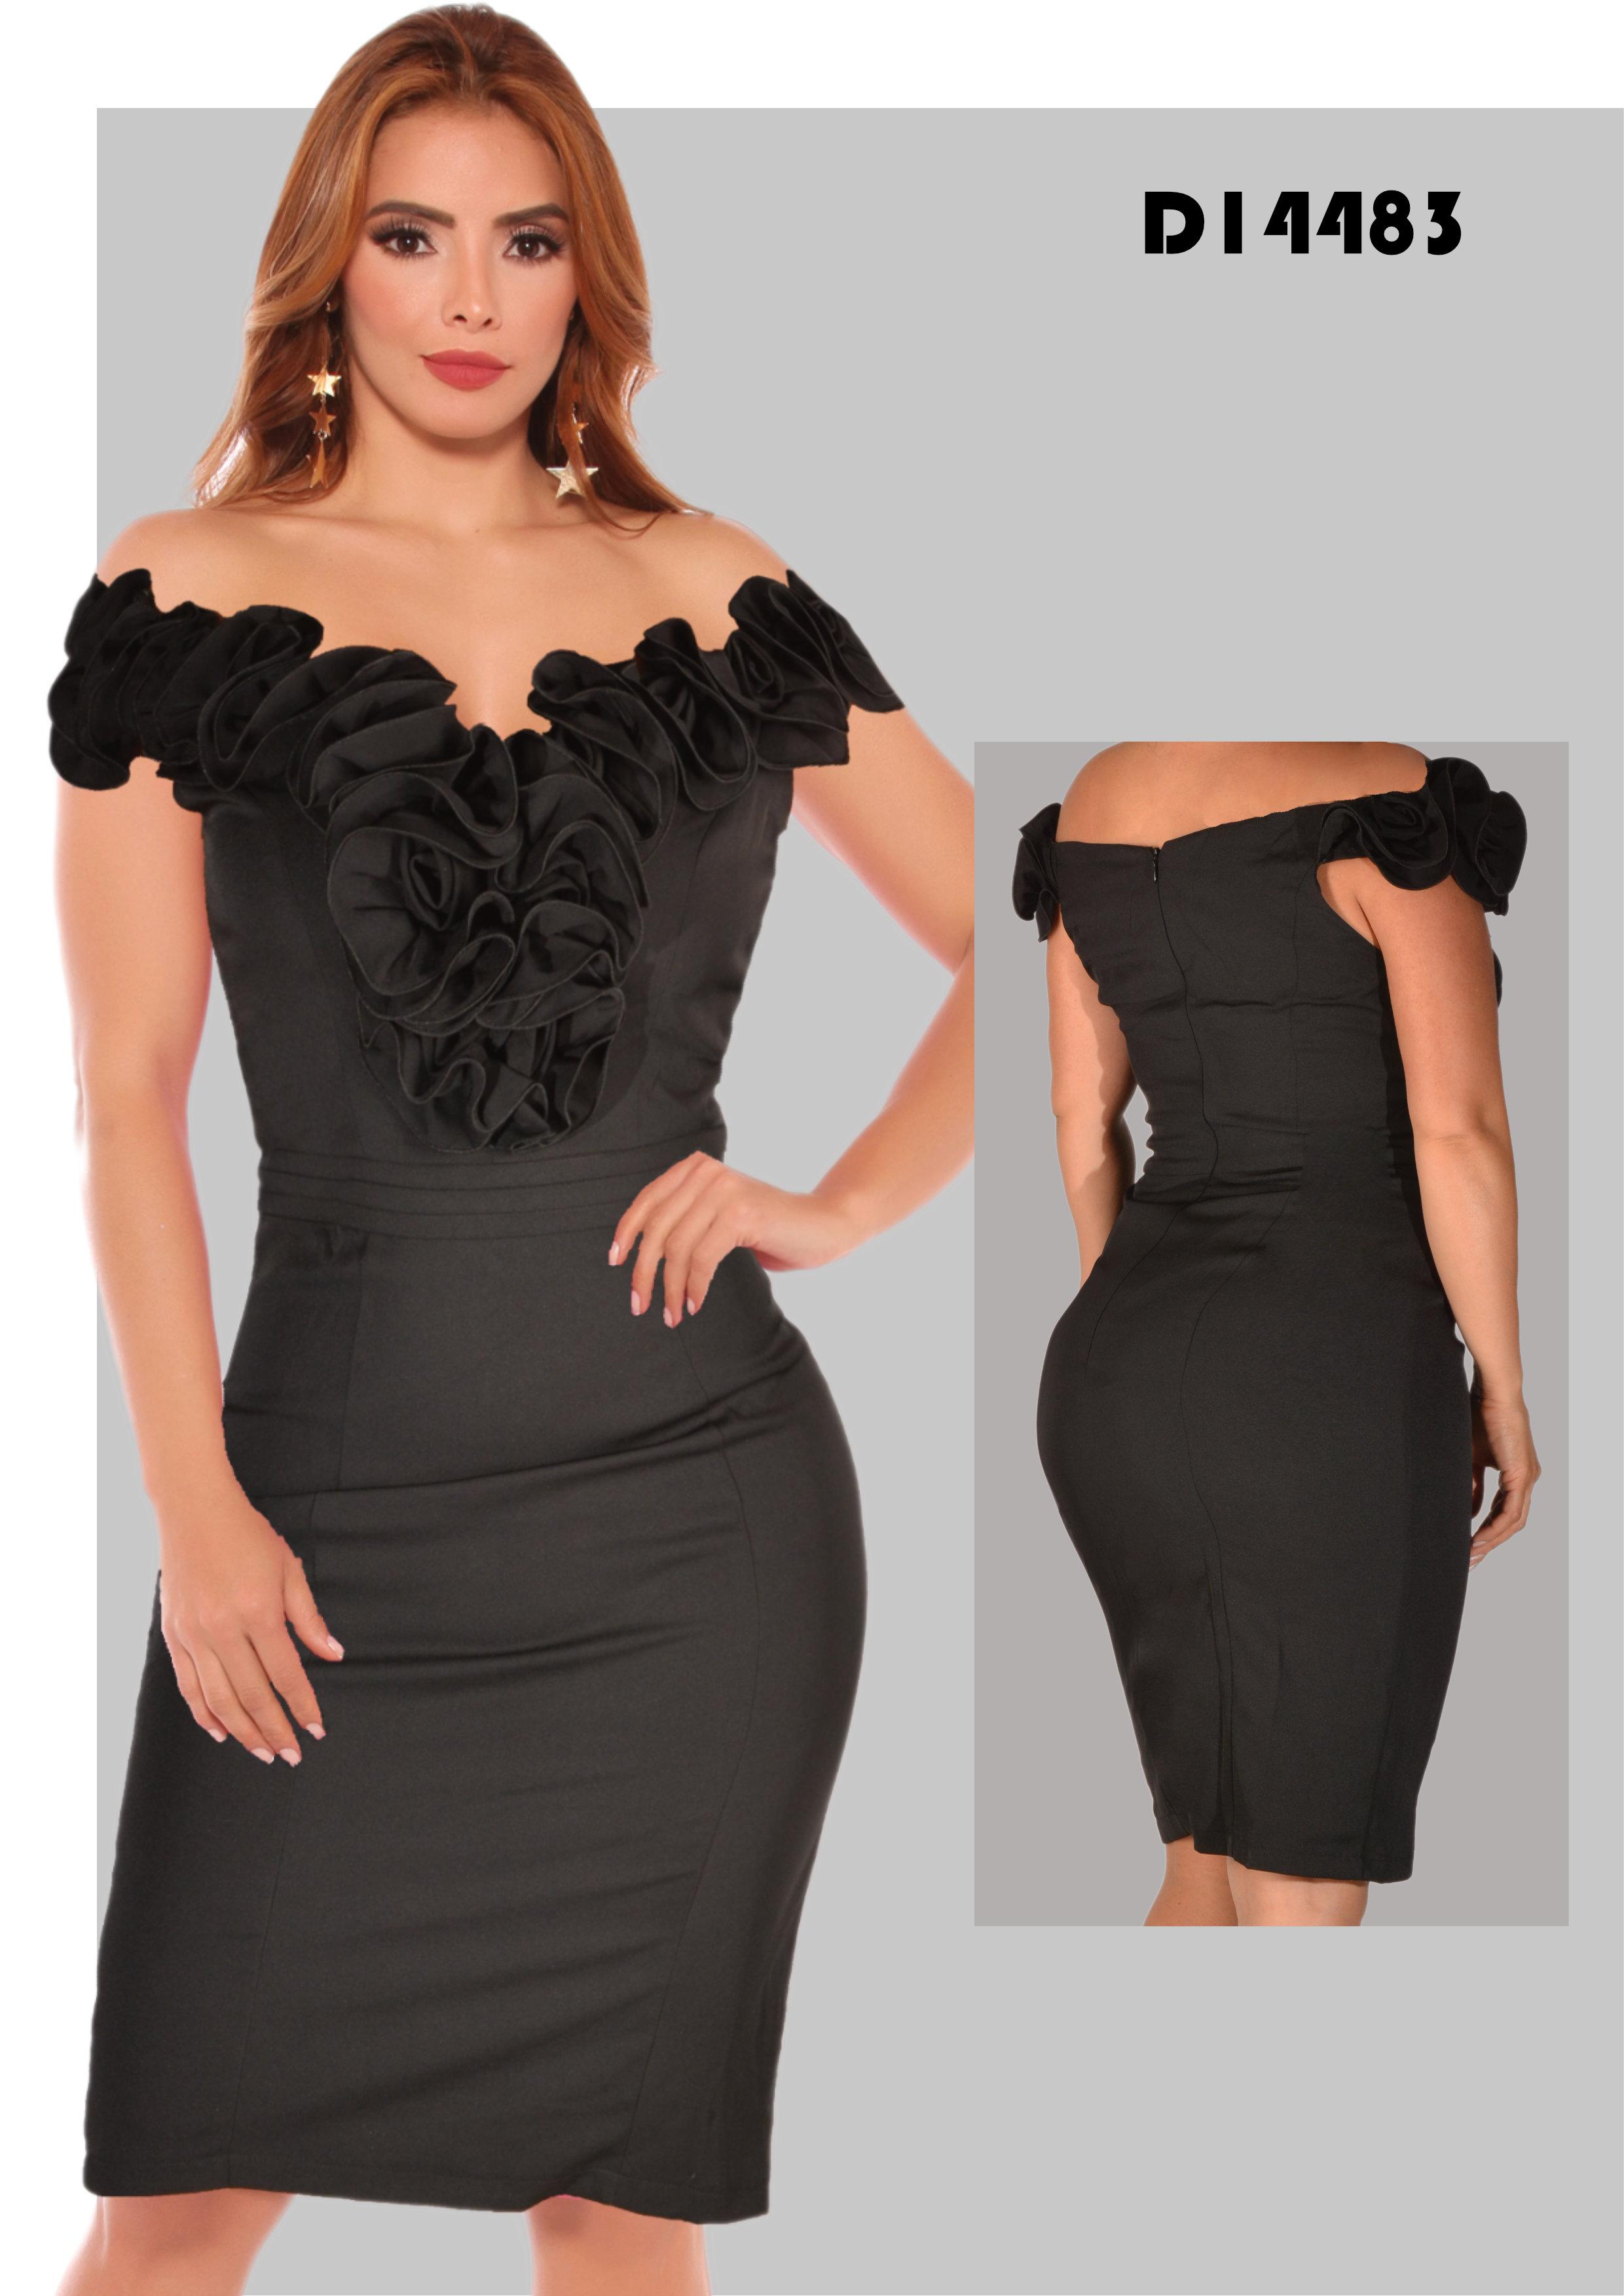 Party Dress with Beautiful Decorated Chest and Neckline, Exclusive Design